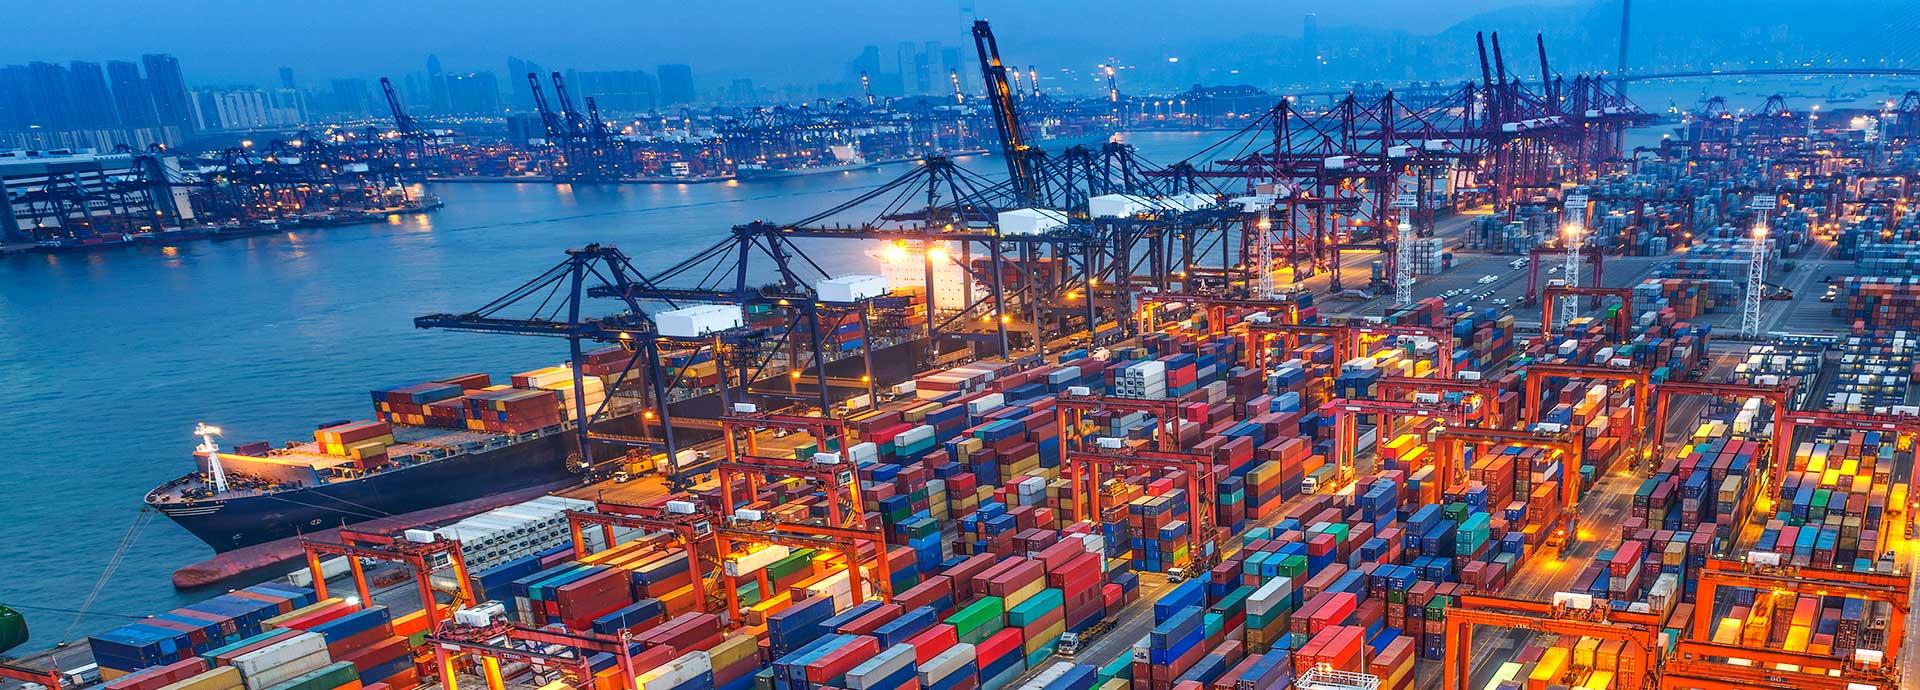 Largest Port in India: Comprehensive Overview and Economic Impact